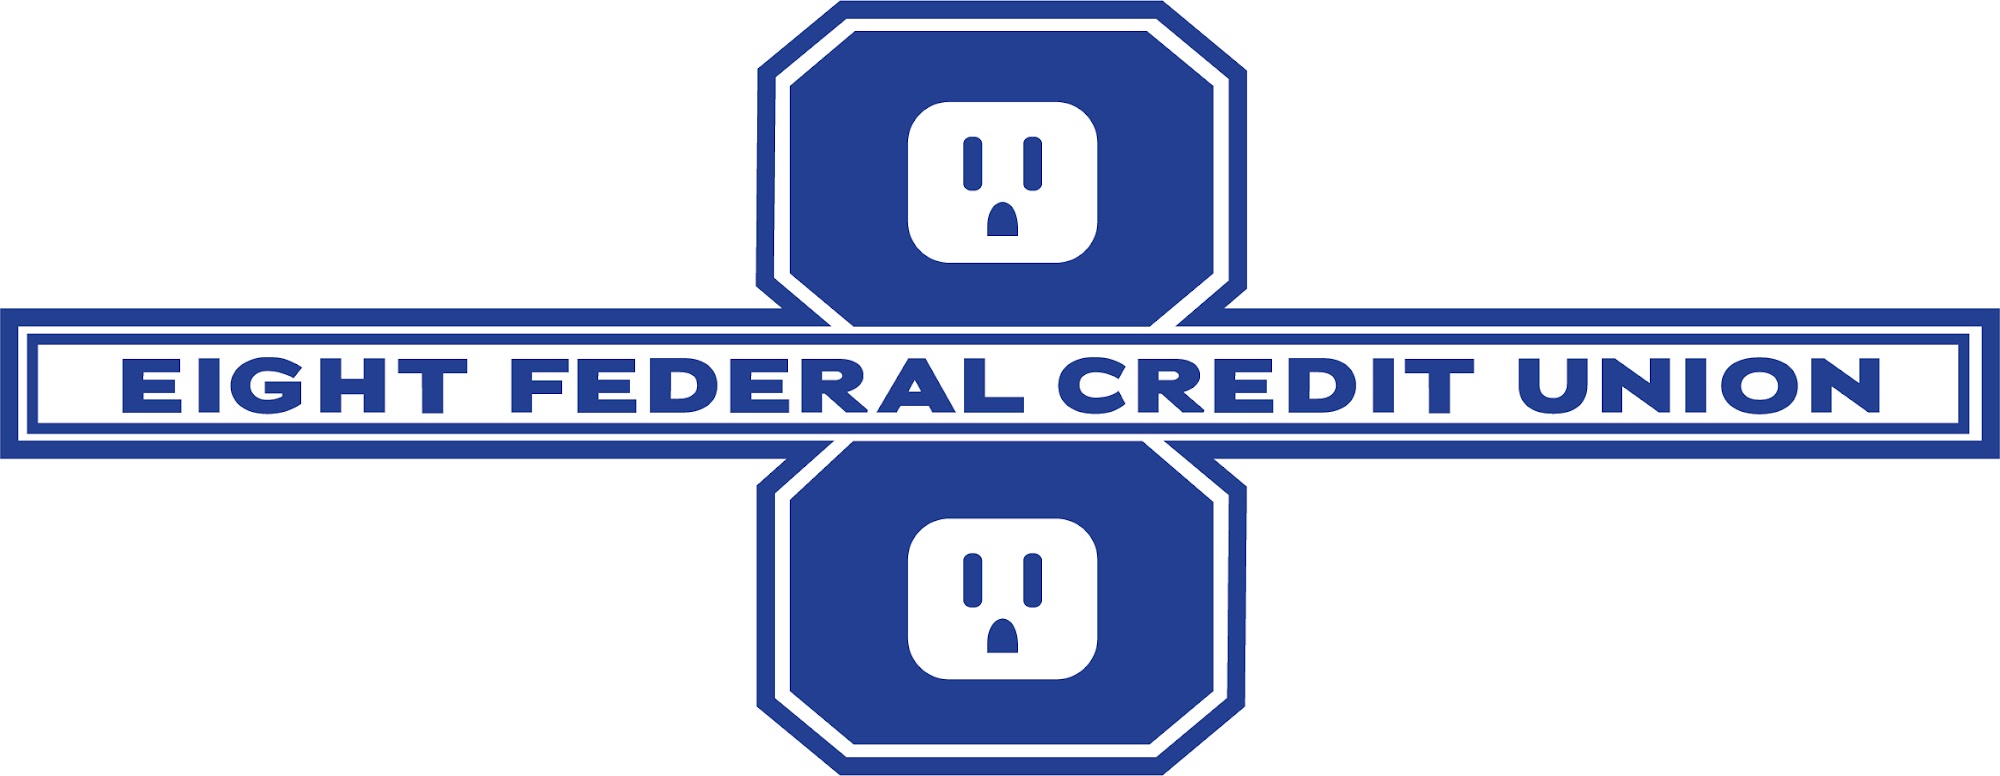 Eight Federal Credit Union